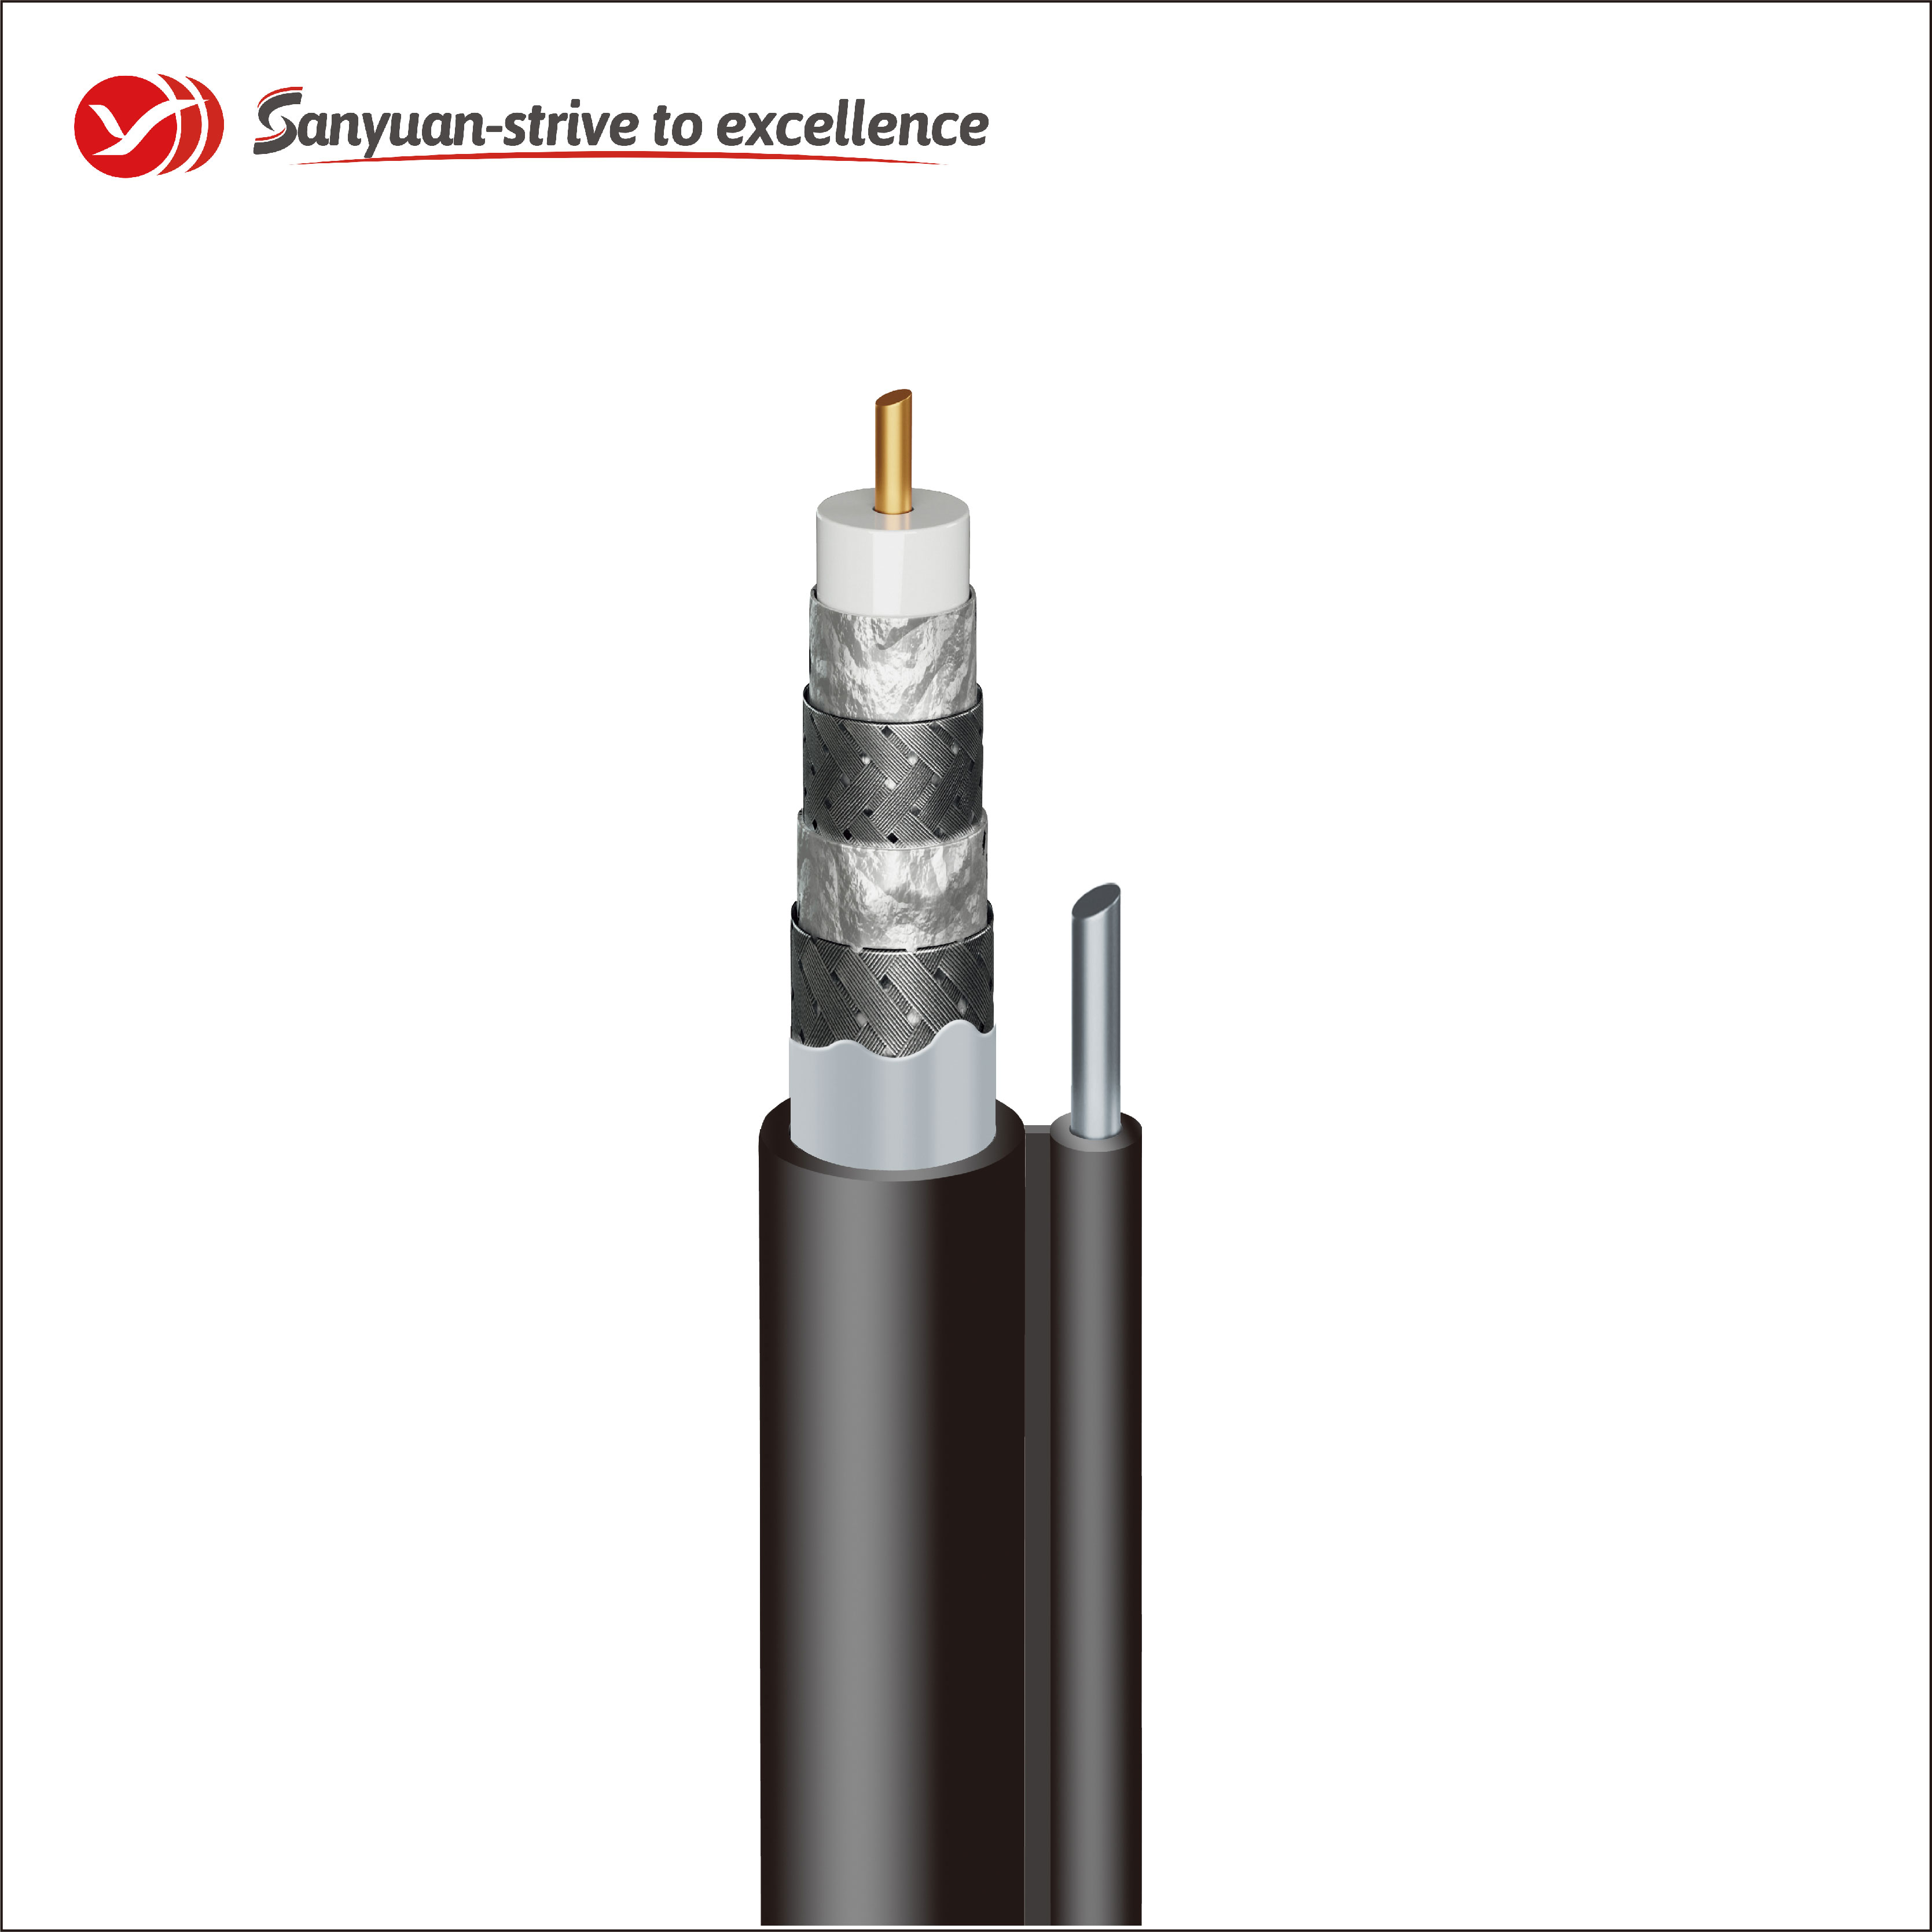 SanYuan best 75 ohm coaxial cable suppliers for digital audio-2